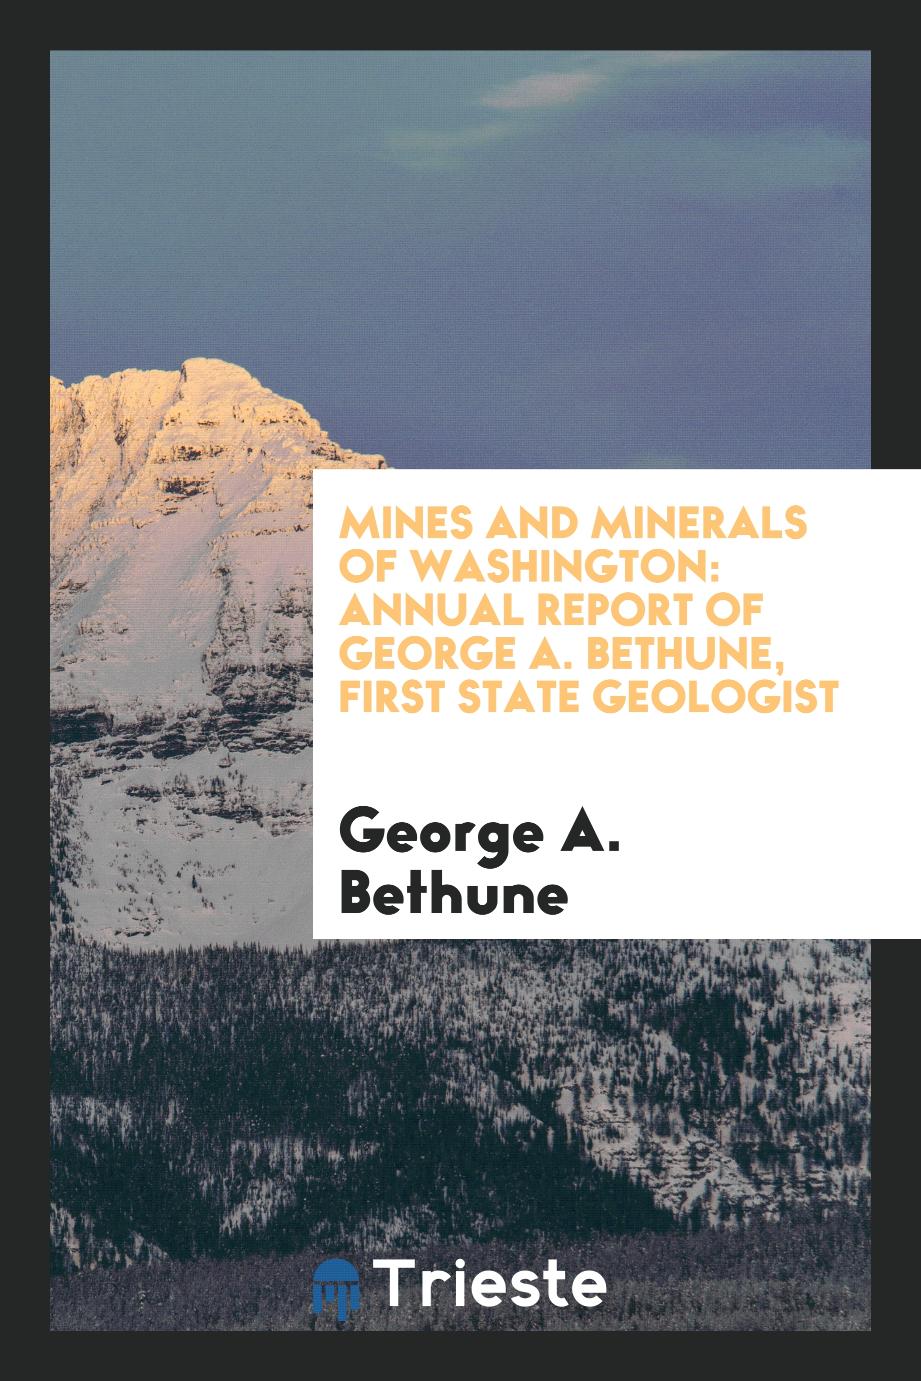 Mines and Minerals of Washington: Annual Report of George A. Bethune, First State Geologist